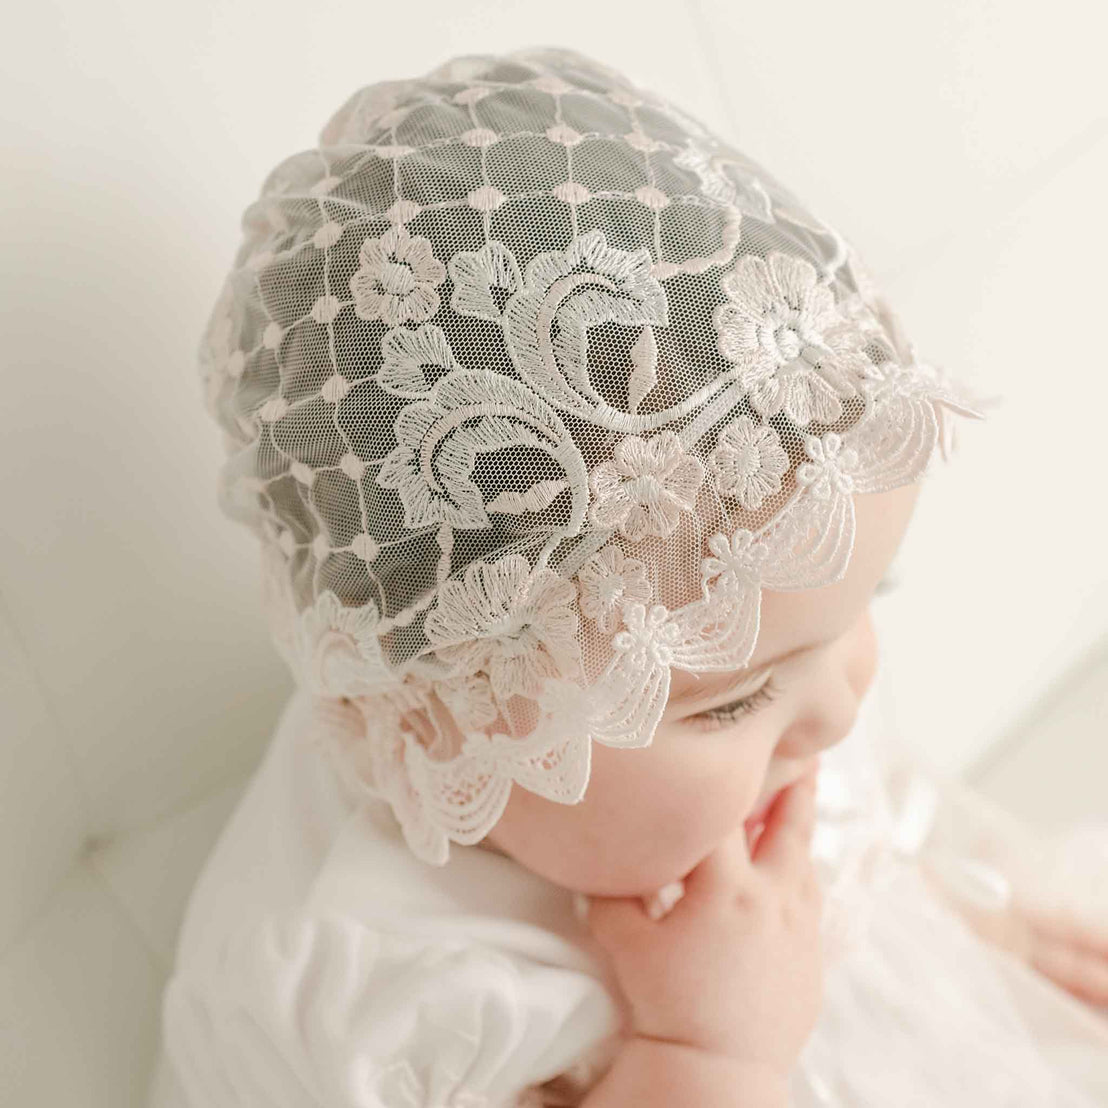 A close-up shot of an infant wearing a Joli Sheer Bonnet, gazing downward contemplatively with a finger near their mouth.